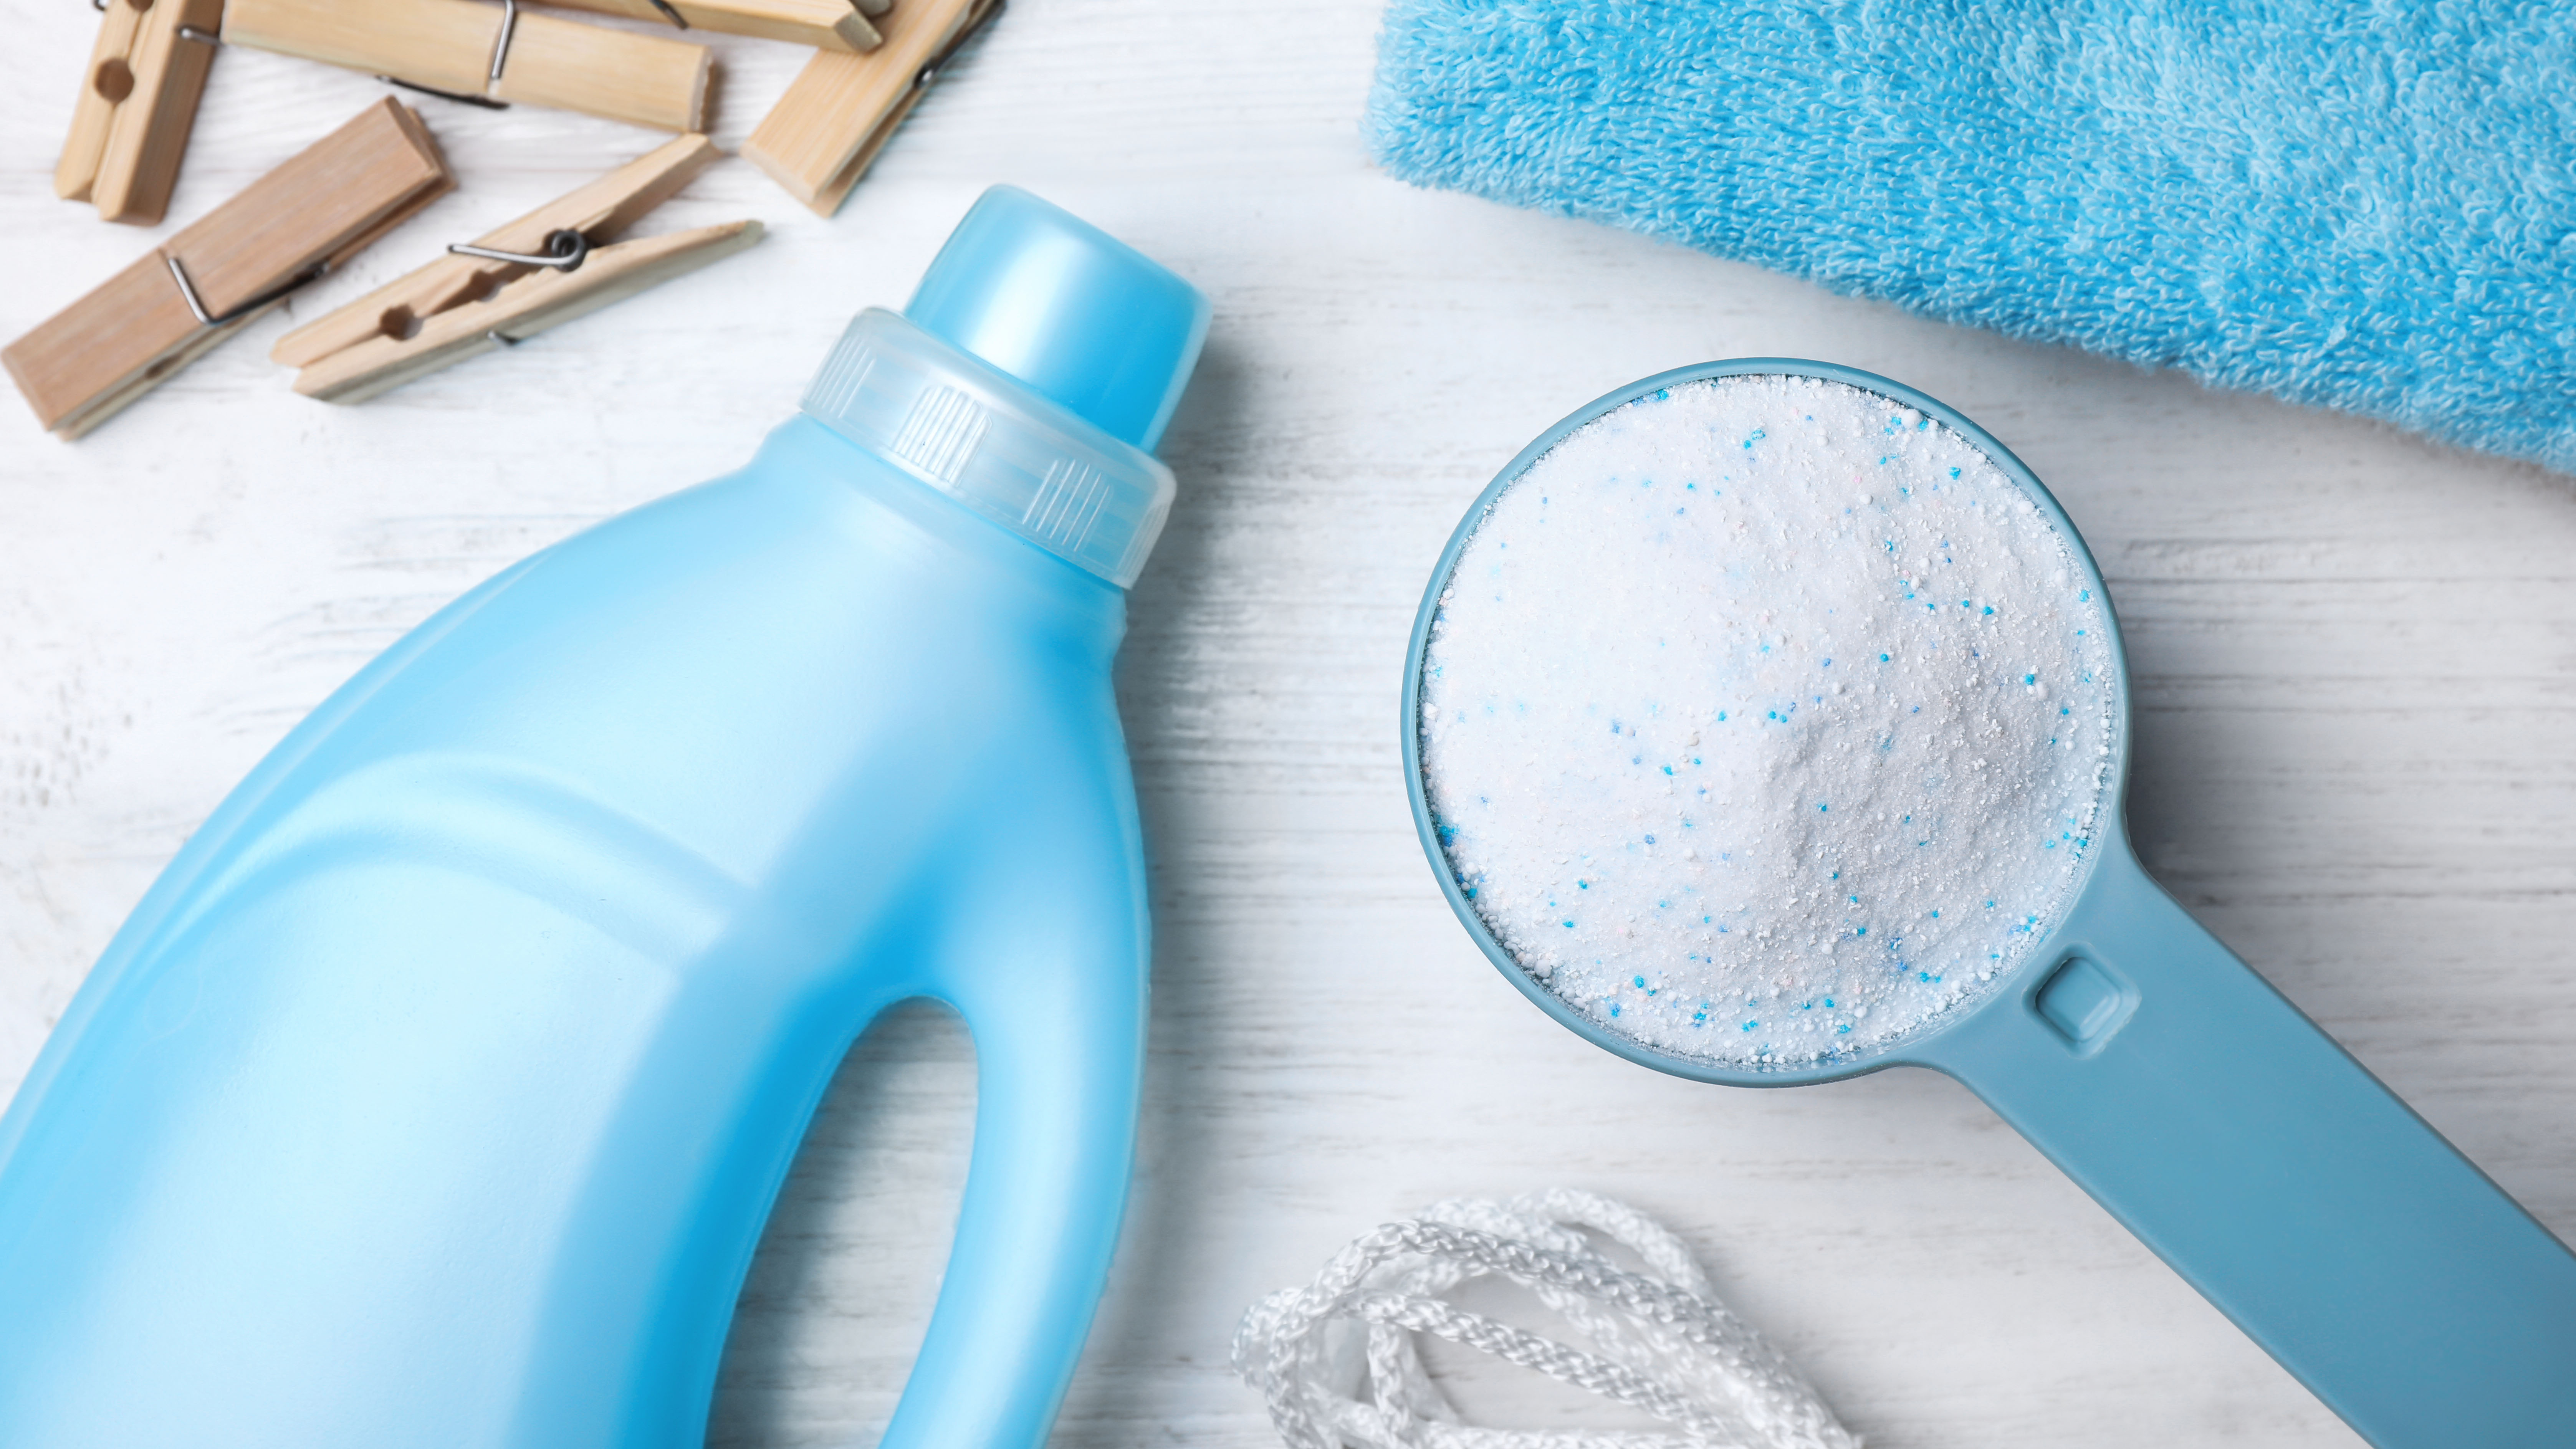 A bottle of liquid laundry detergent next to a scoop filled with powdered laundry detergent next to some clothespins and towels